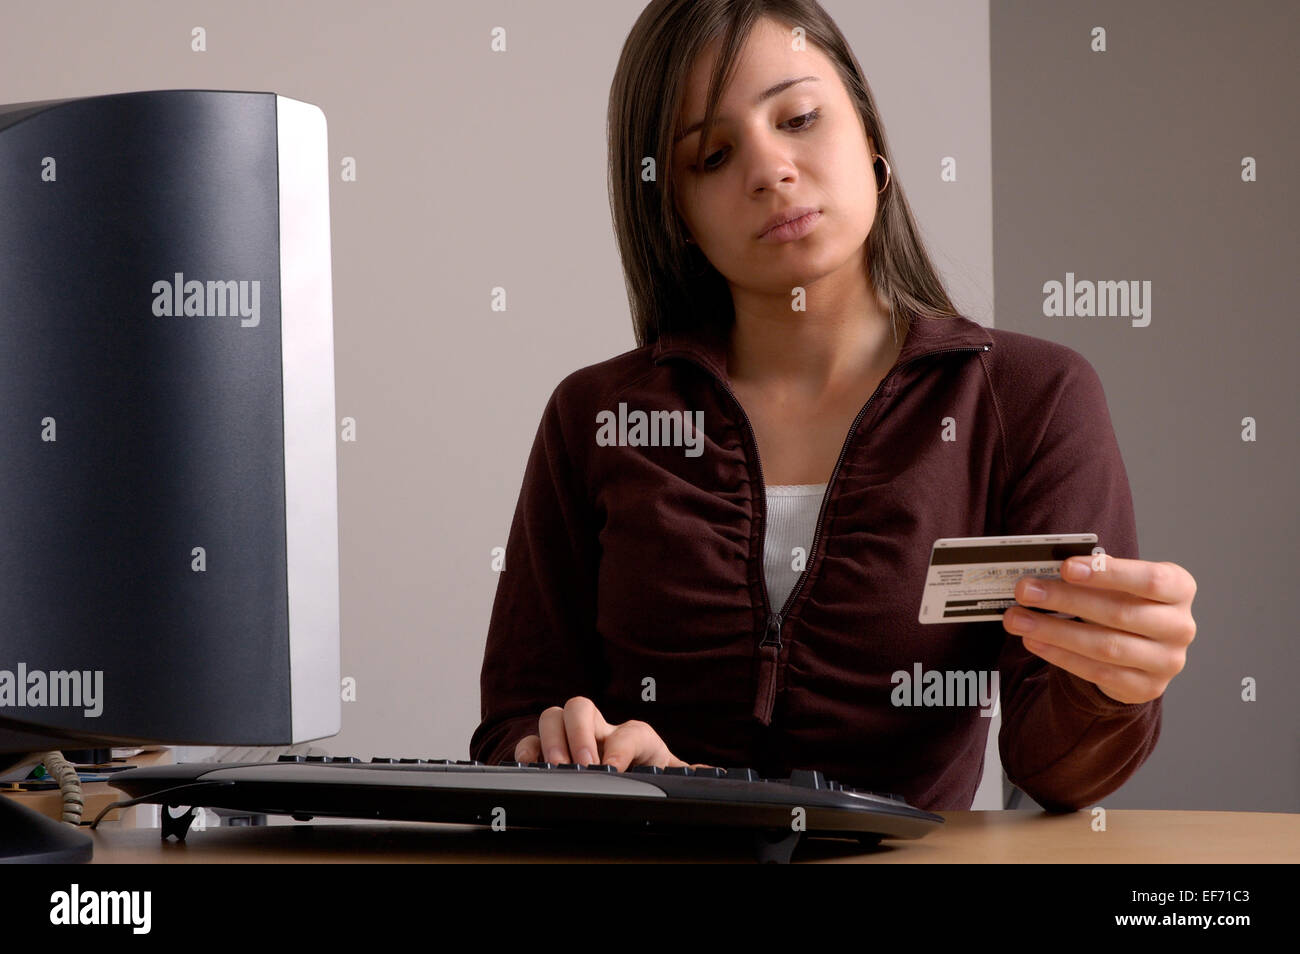 A young woman makes a charge card or credit card purchase from her home computer. Stock Photo